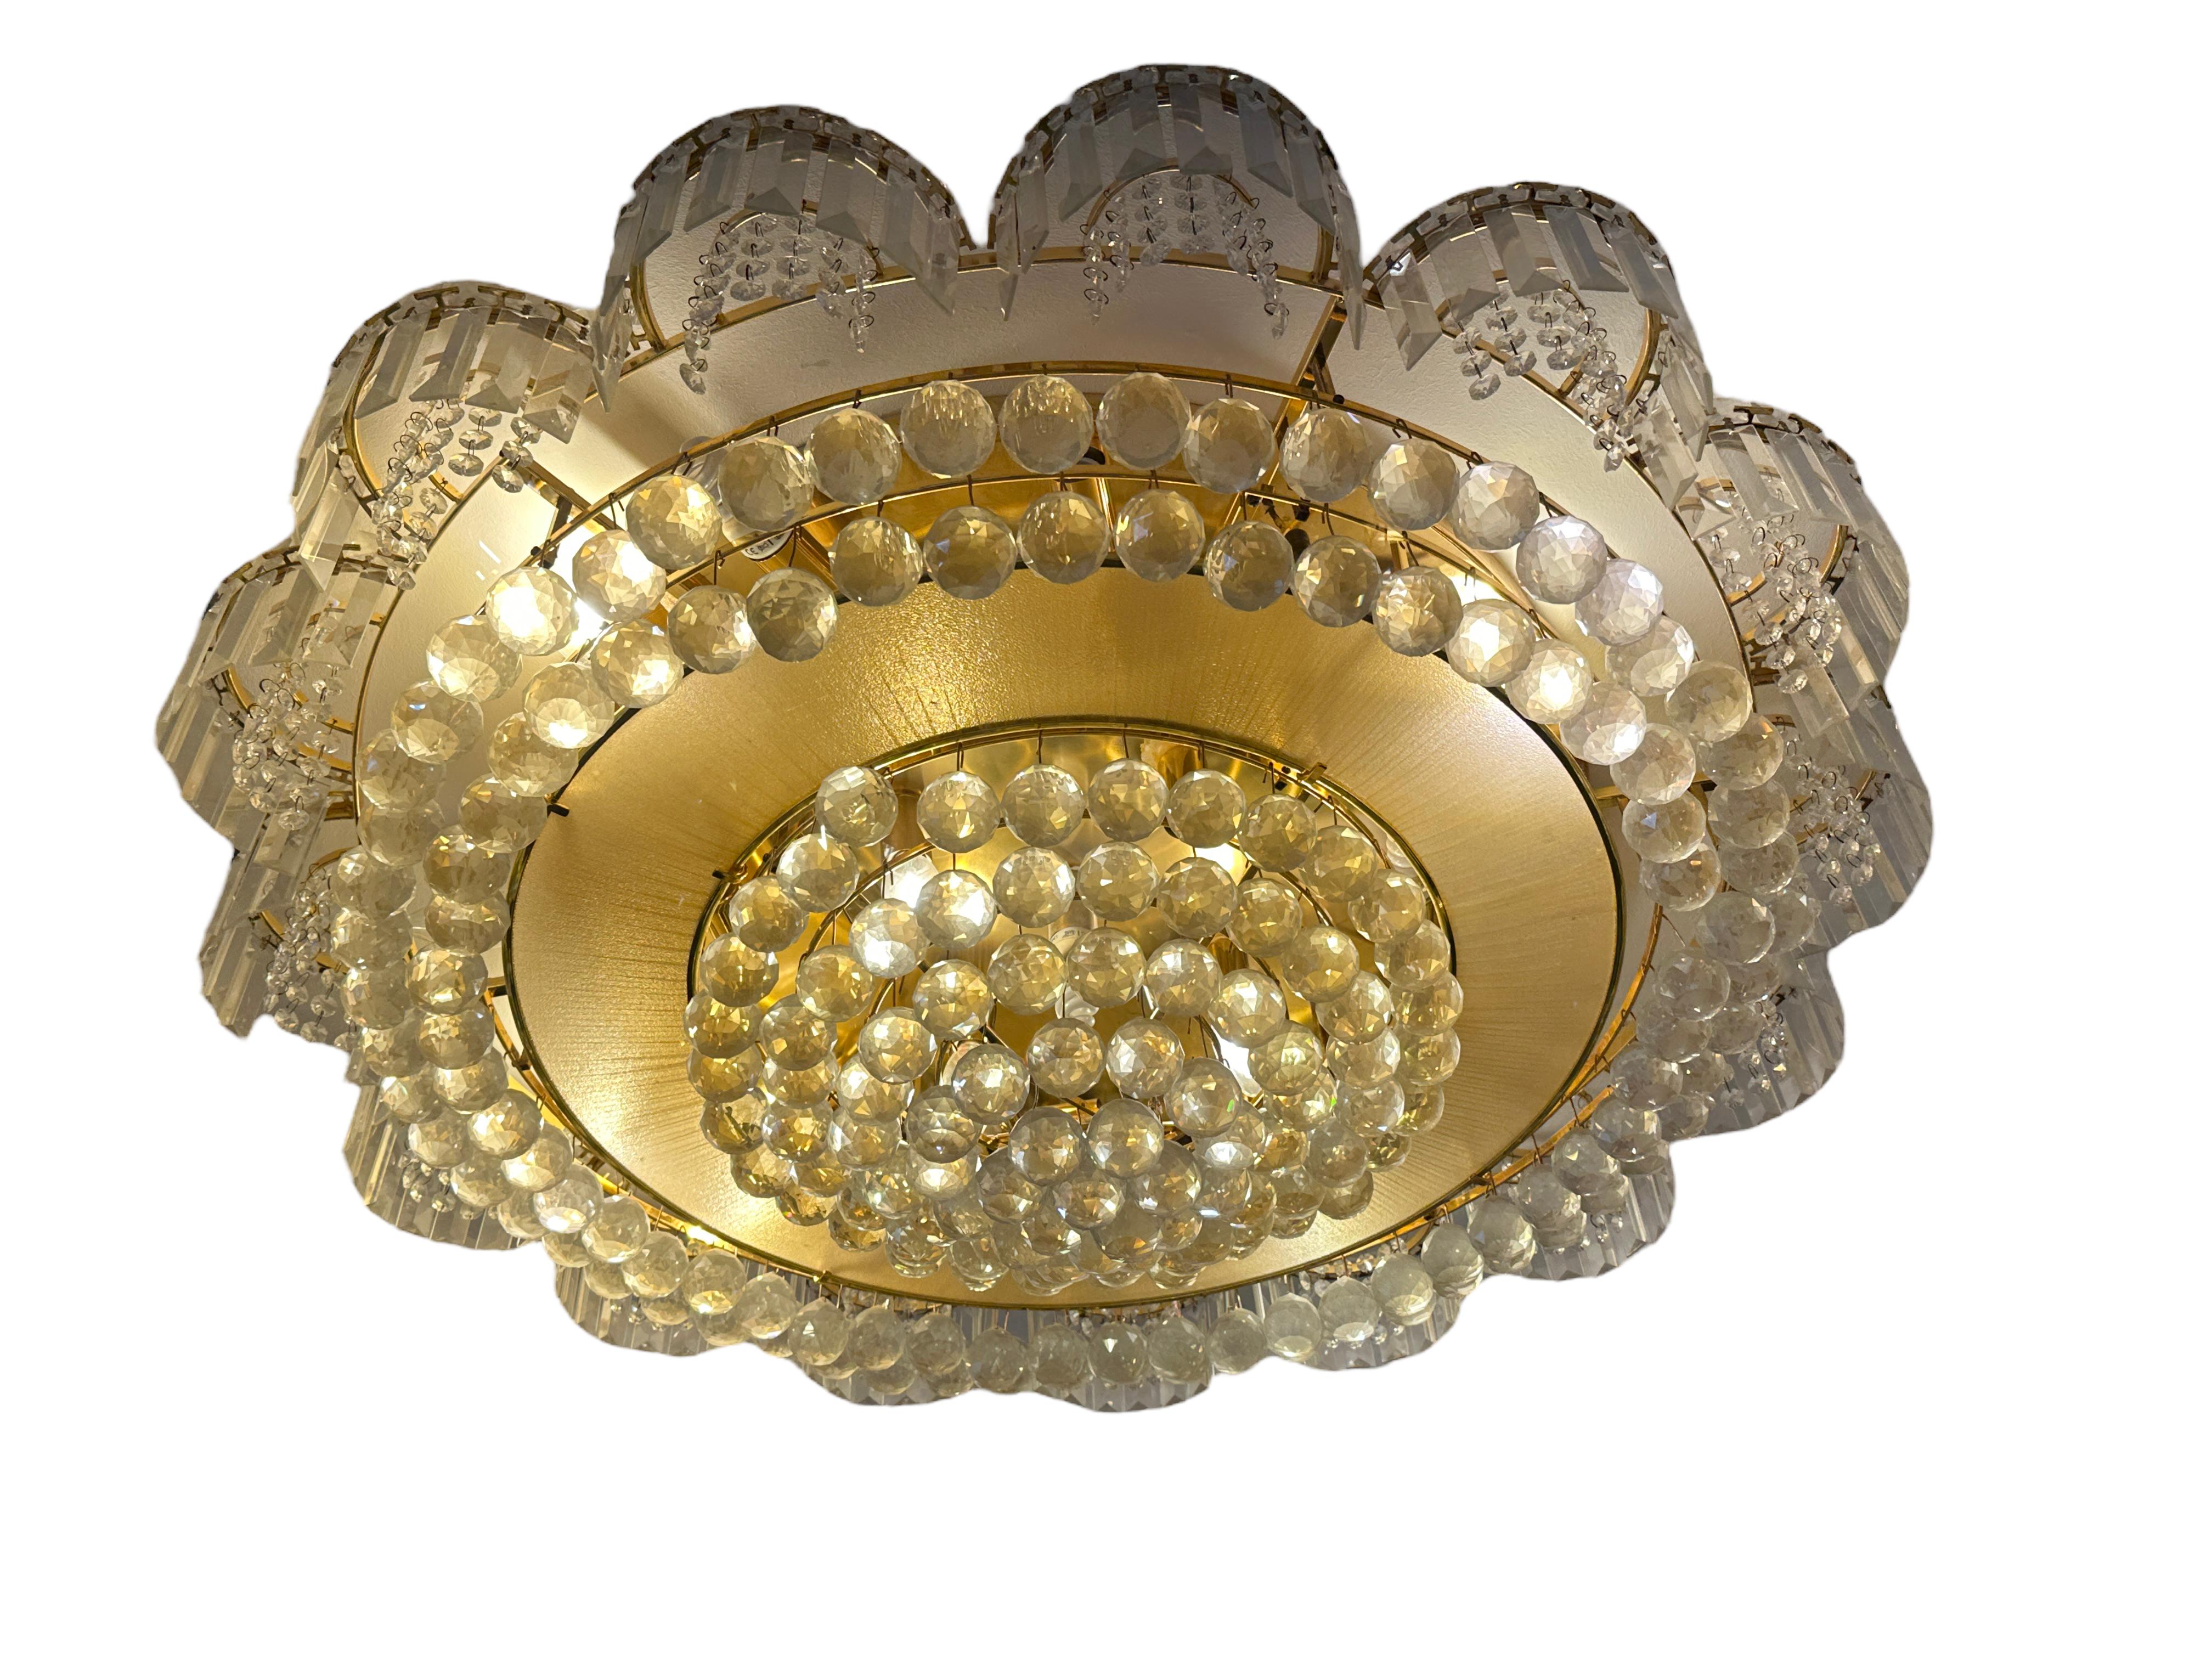 Stunning Monumental Brass Crystal Flush Mount Chandelier by Palwa Germany 1980s For Sale 1